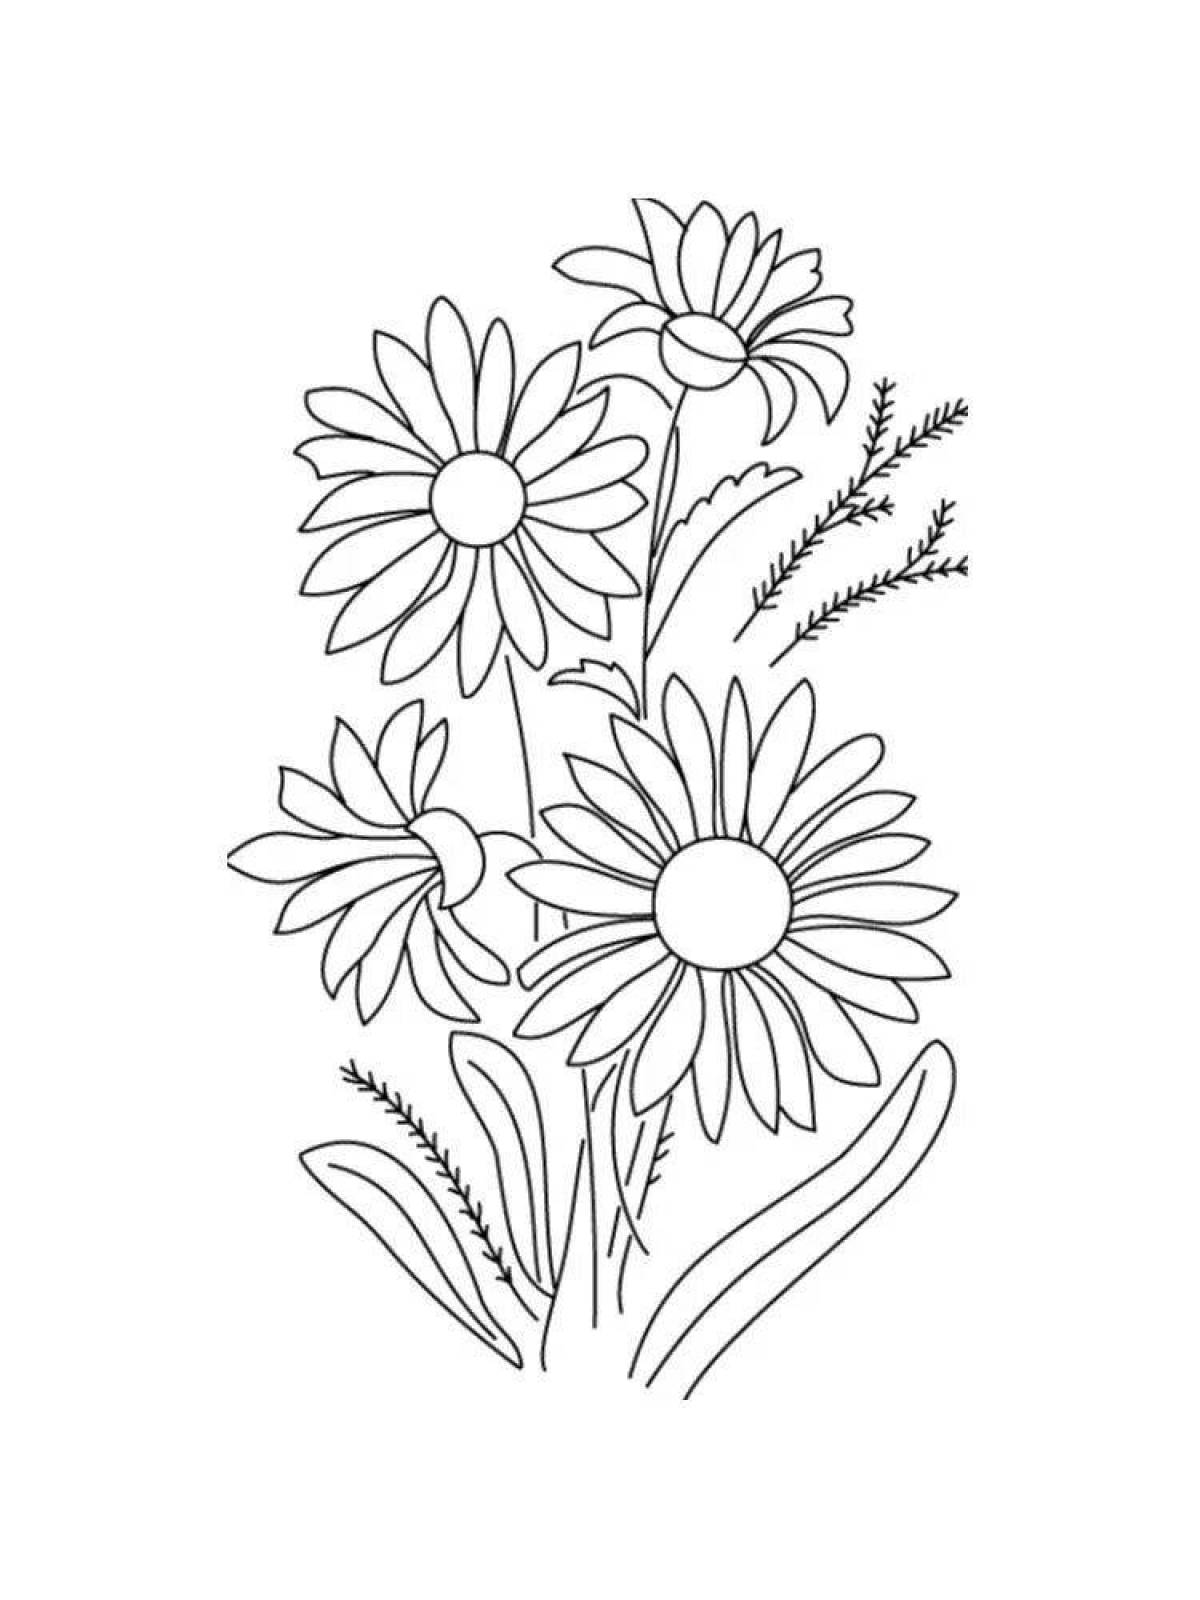 Colouring bright chamomile flowers